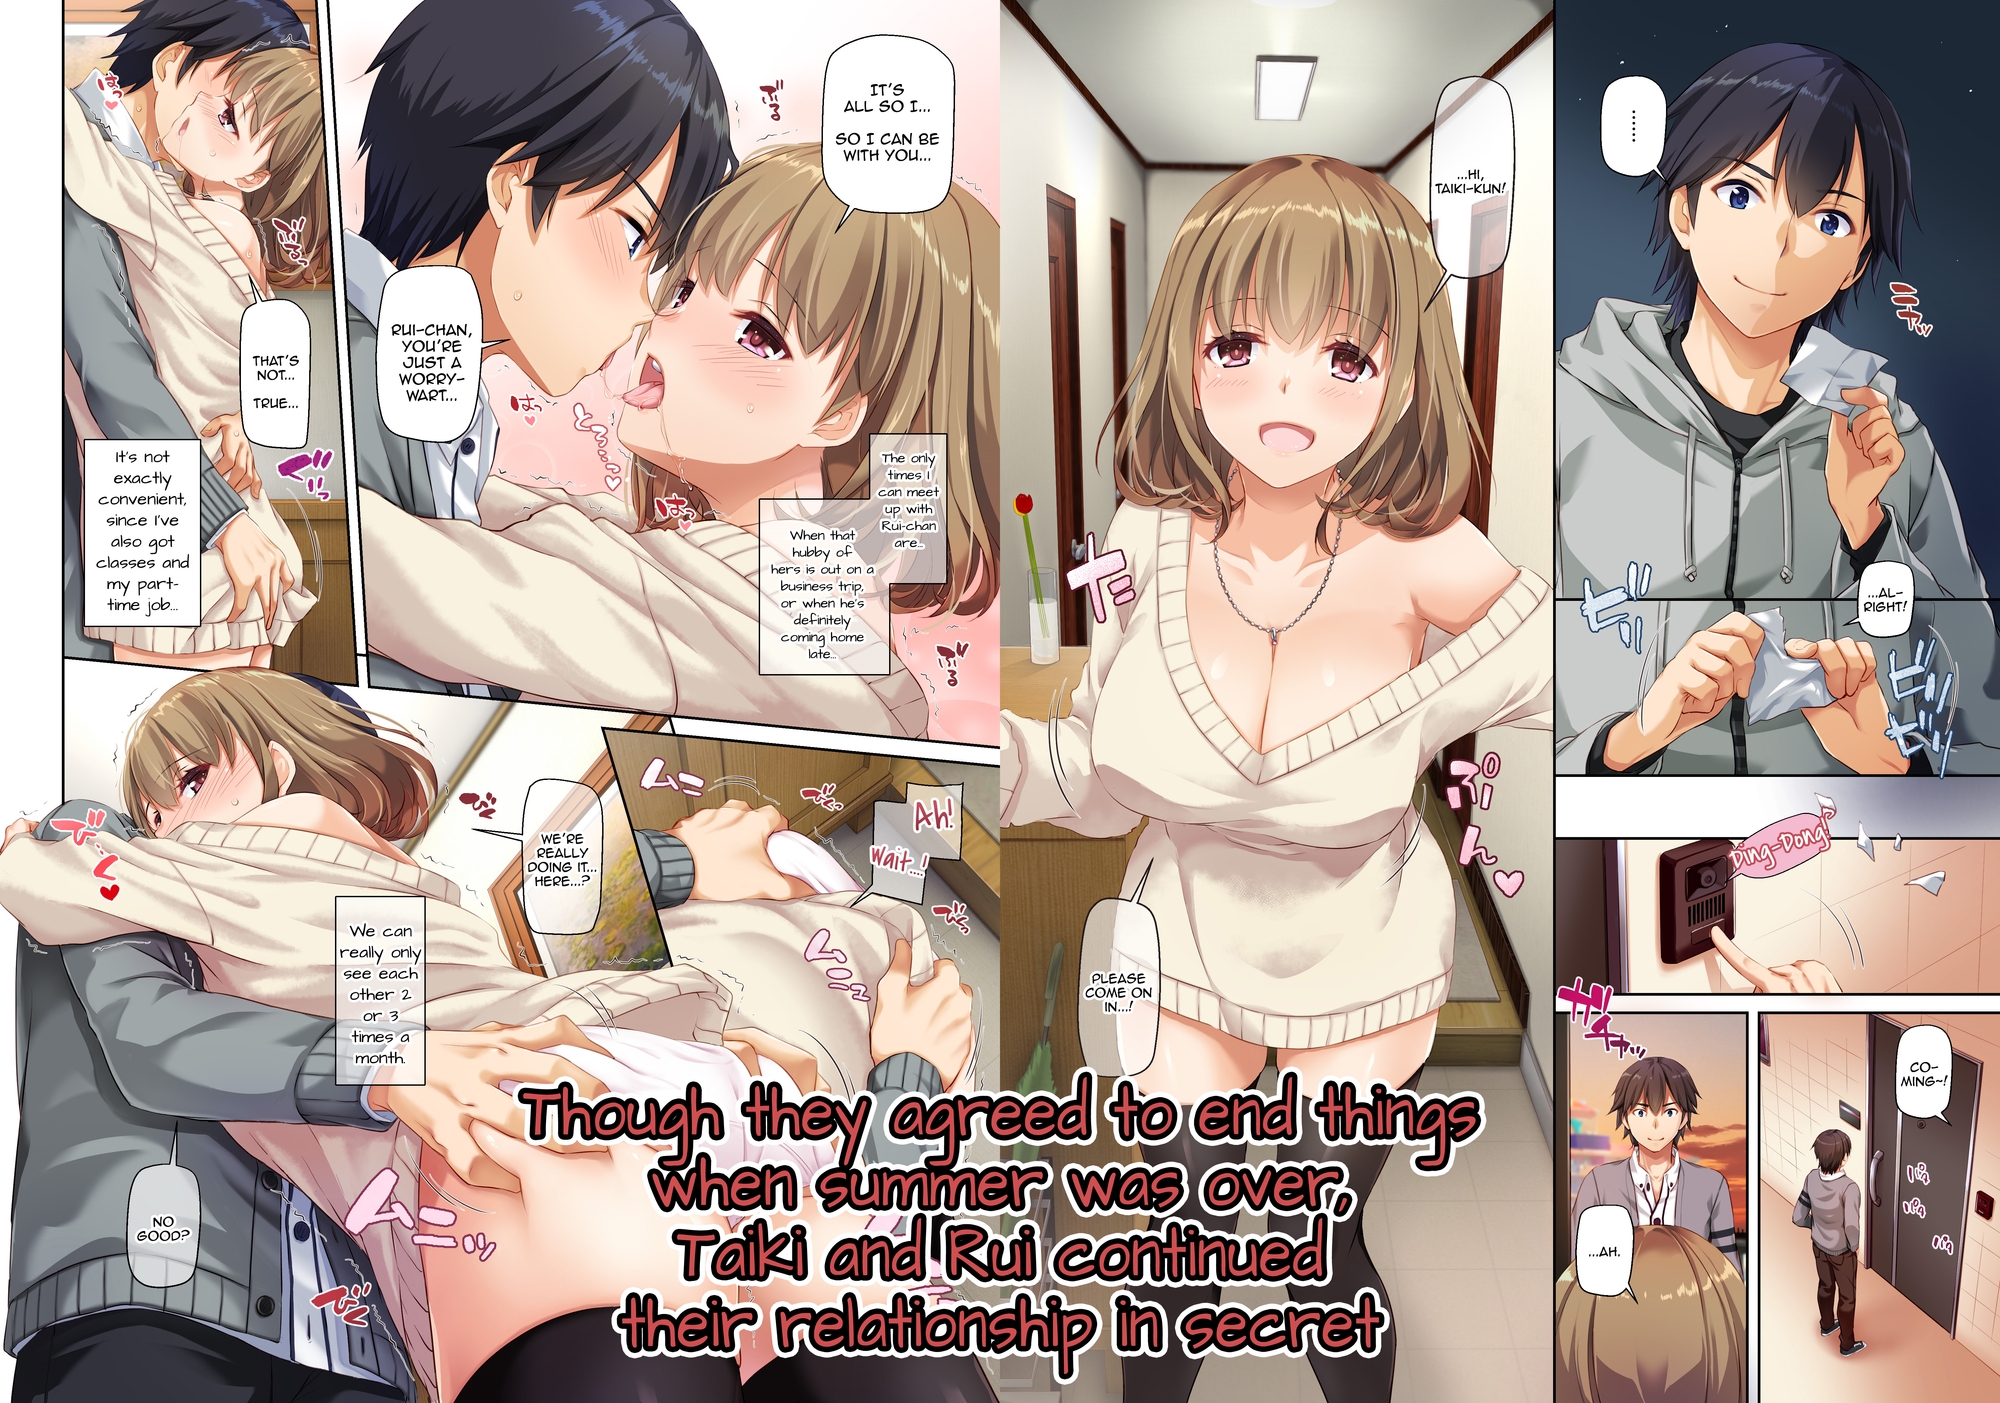 [ENG Ver.] Summer Affair With a Married Childhood Friend 2 - DLO-10【コミック・CG】